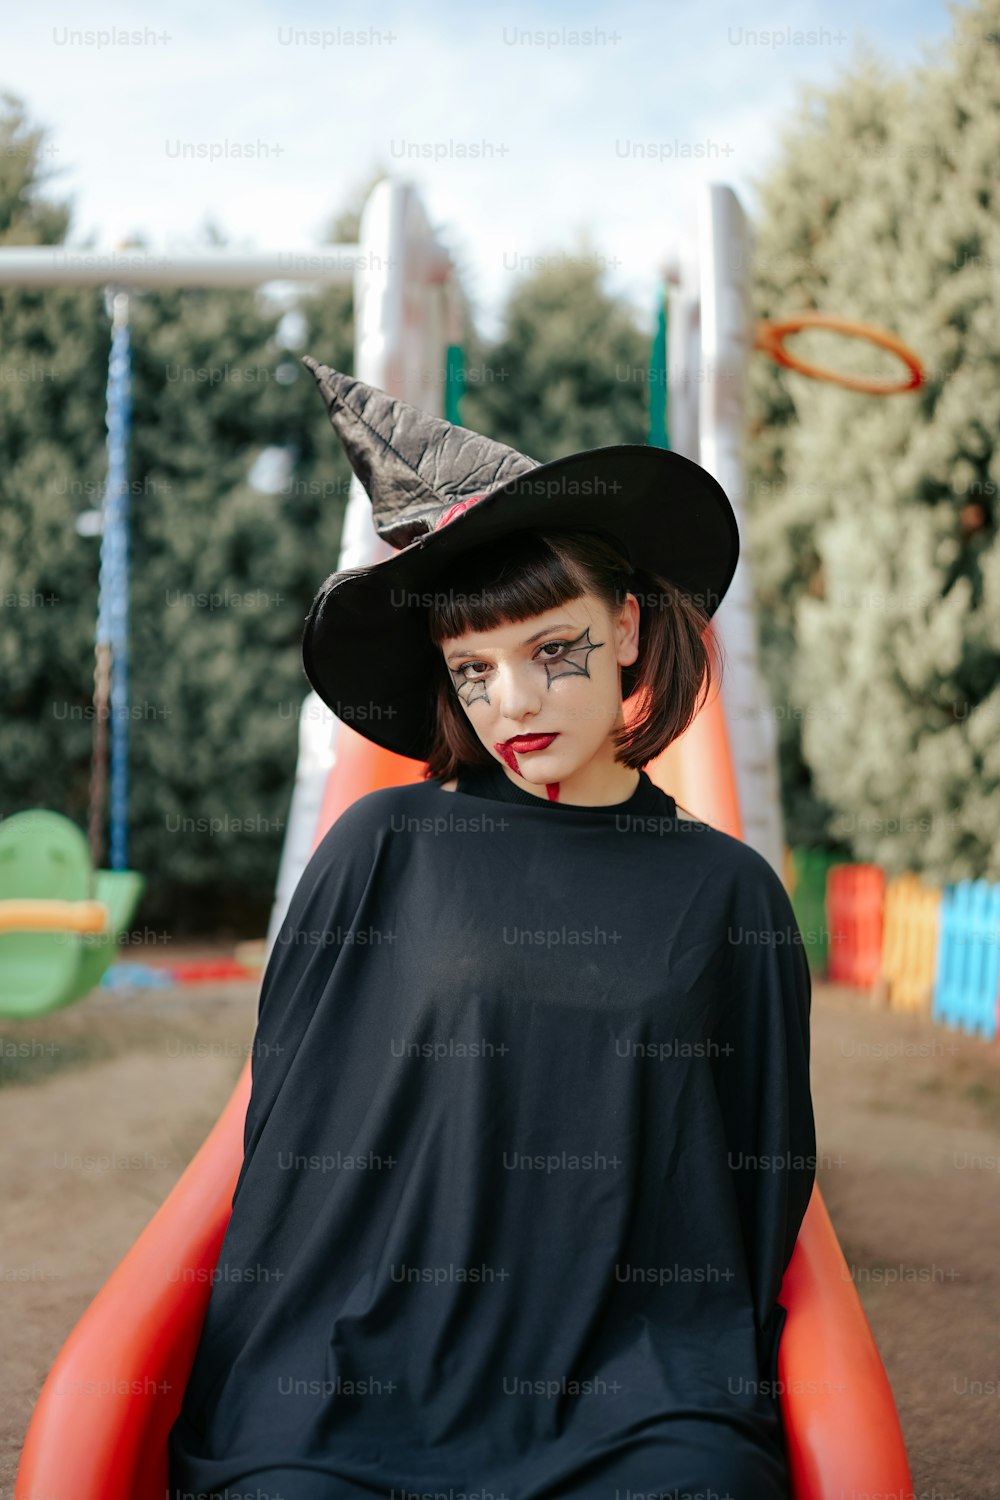 a woman in a witches costume sitting in a playground